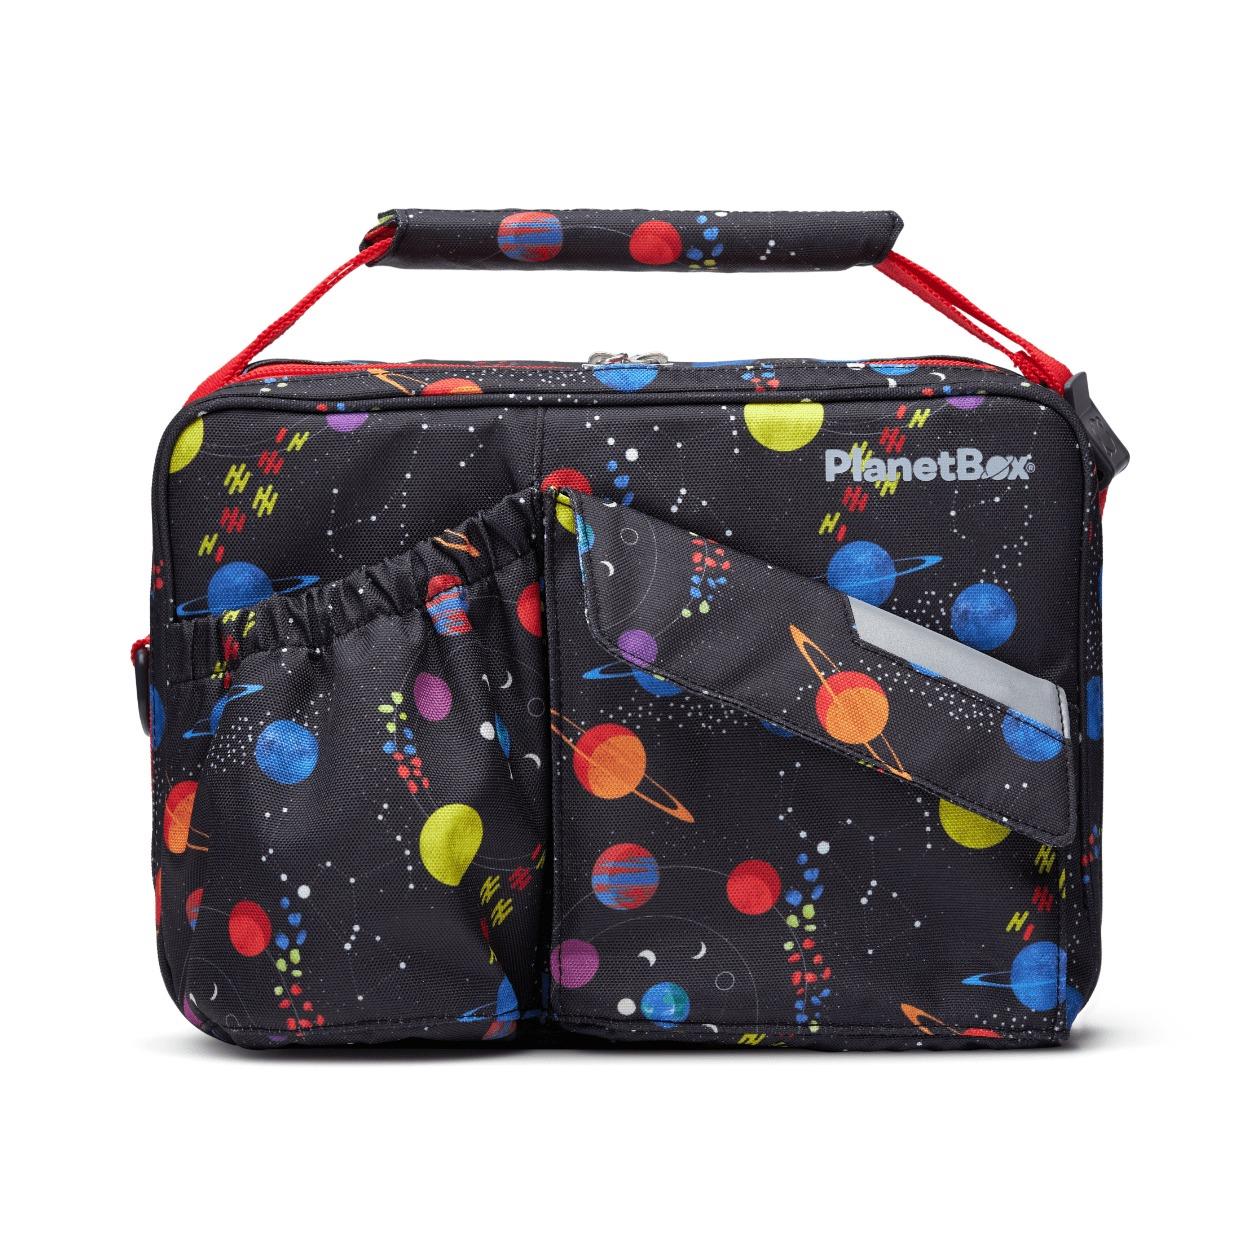 PlanetBox Insulated Lunch Carry Bag - Interstellar